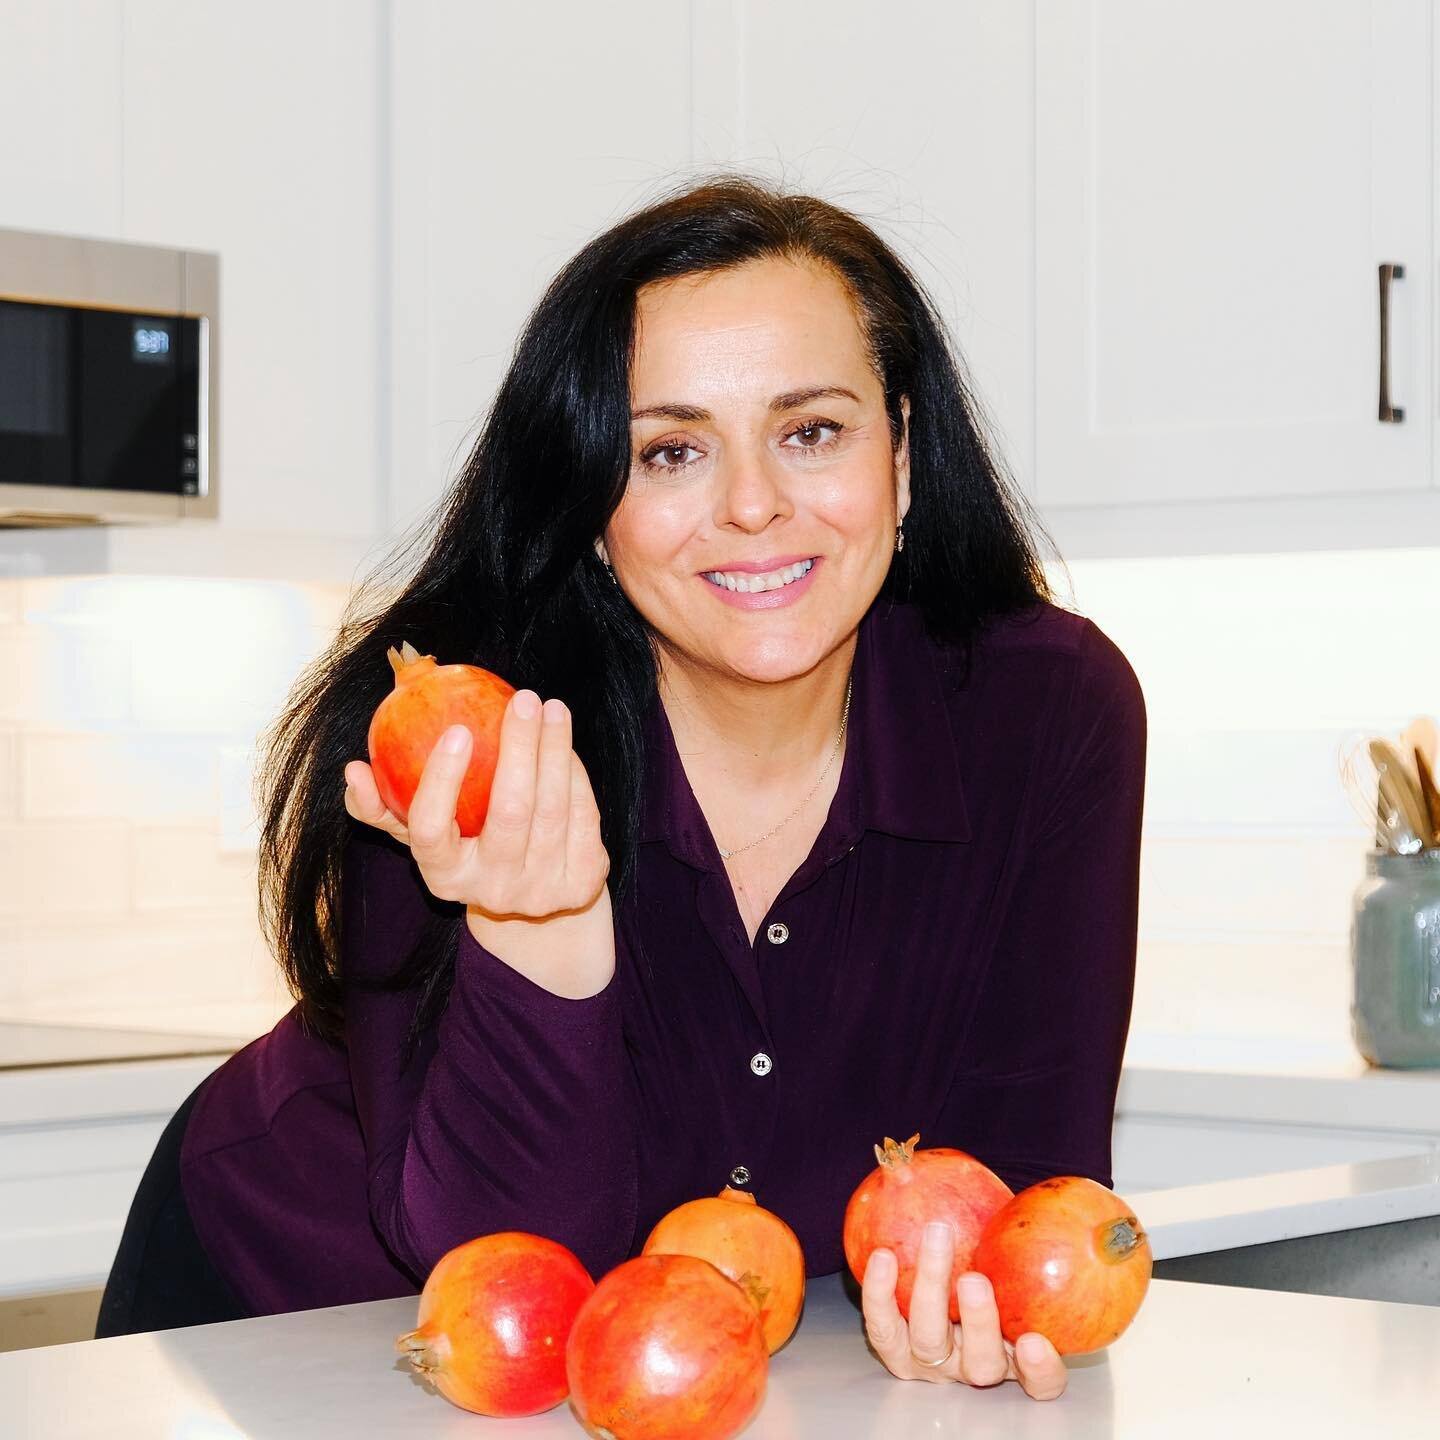 Meet Miss Nada, our lovely culinary teacher! 

Miss Nada (@mintandzaatar) is a Lebanese chef based in Canada. When she&rsquo;s not spending quality time cooking with her children and grandchildren, Miss Nada teaches cooking classes to learners of all